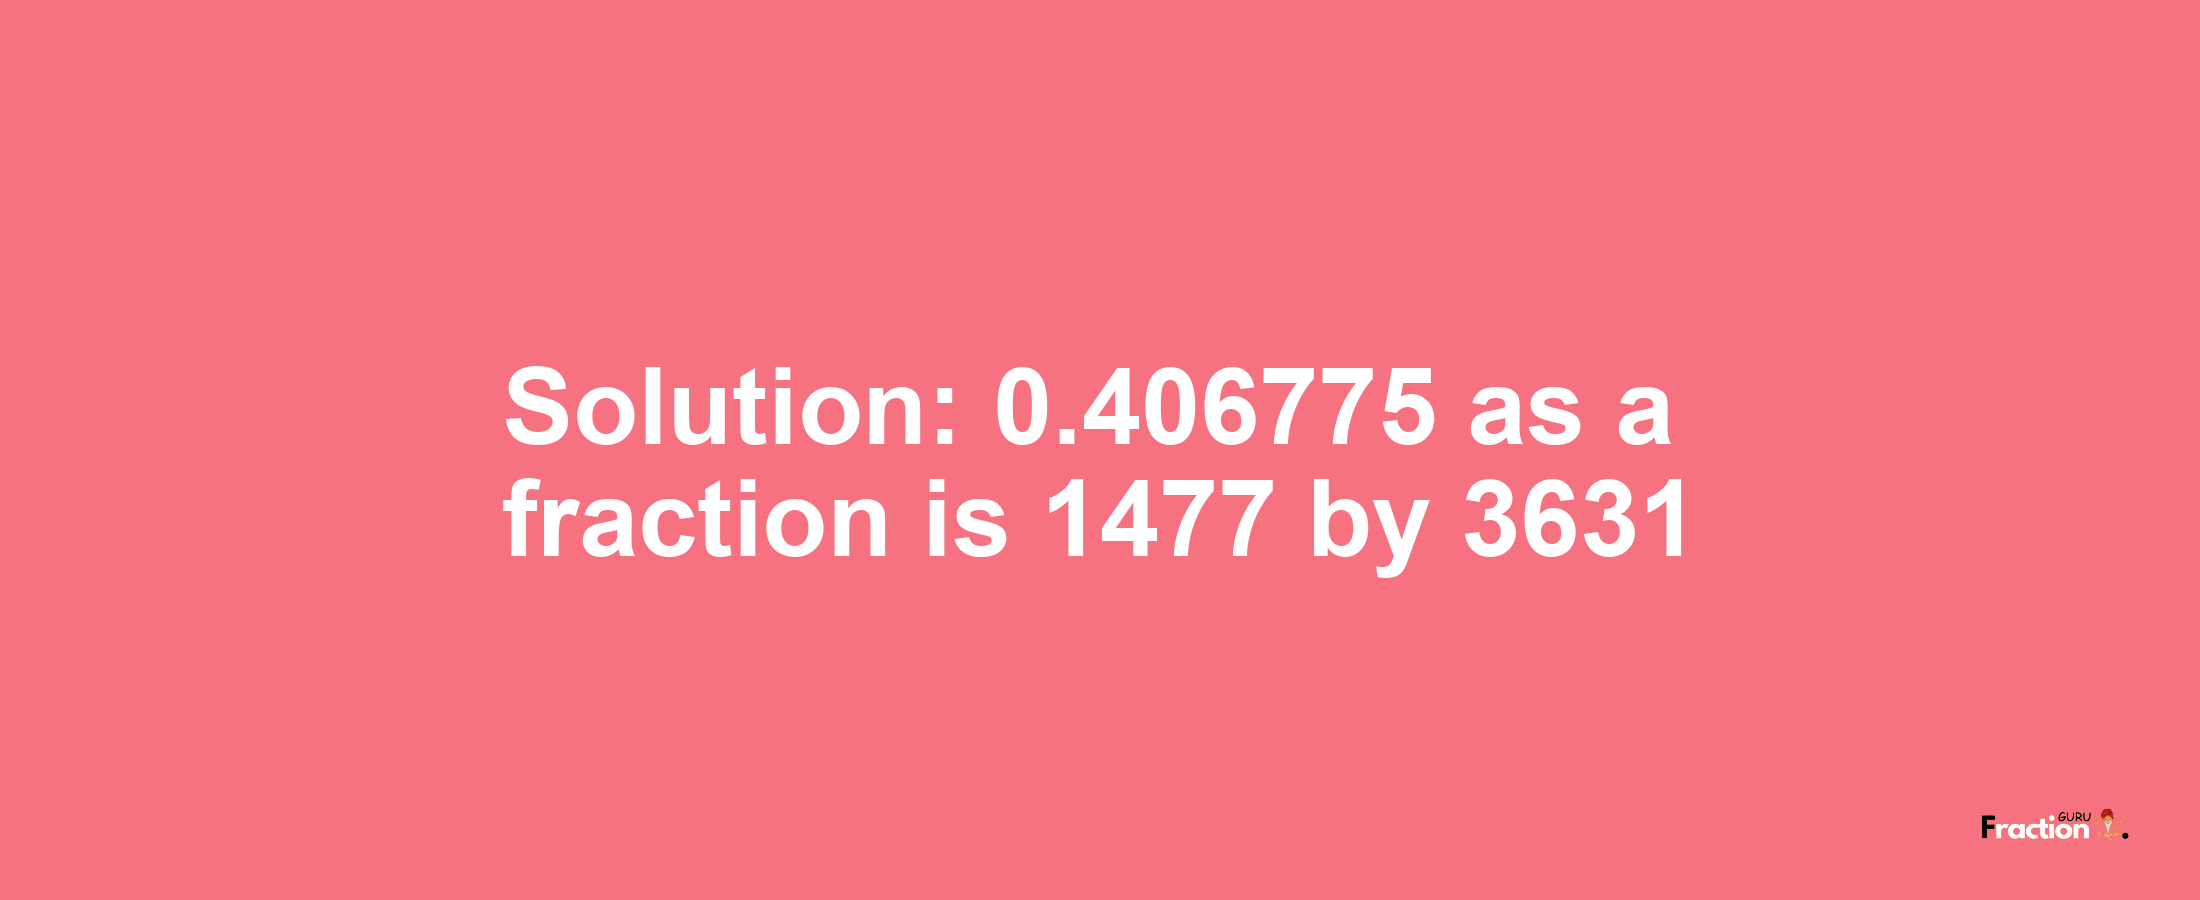 Solution:0.406775 as a fraction is 1477/3631